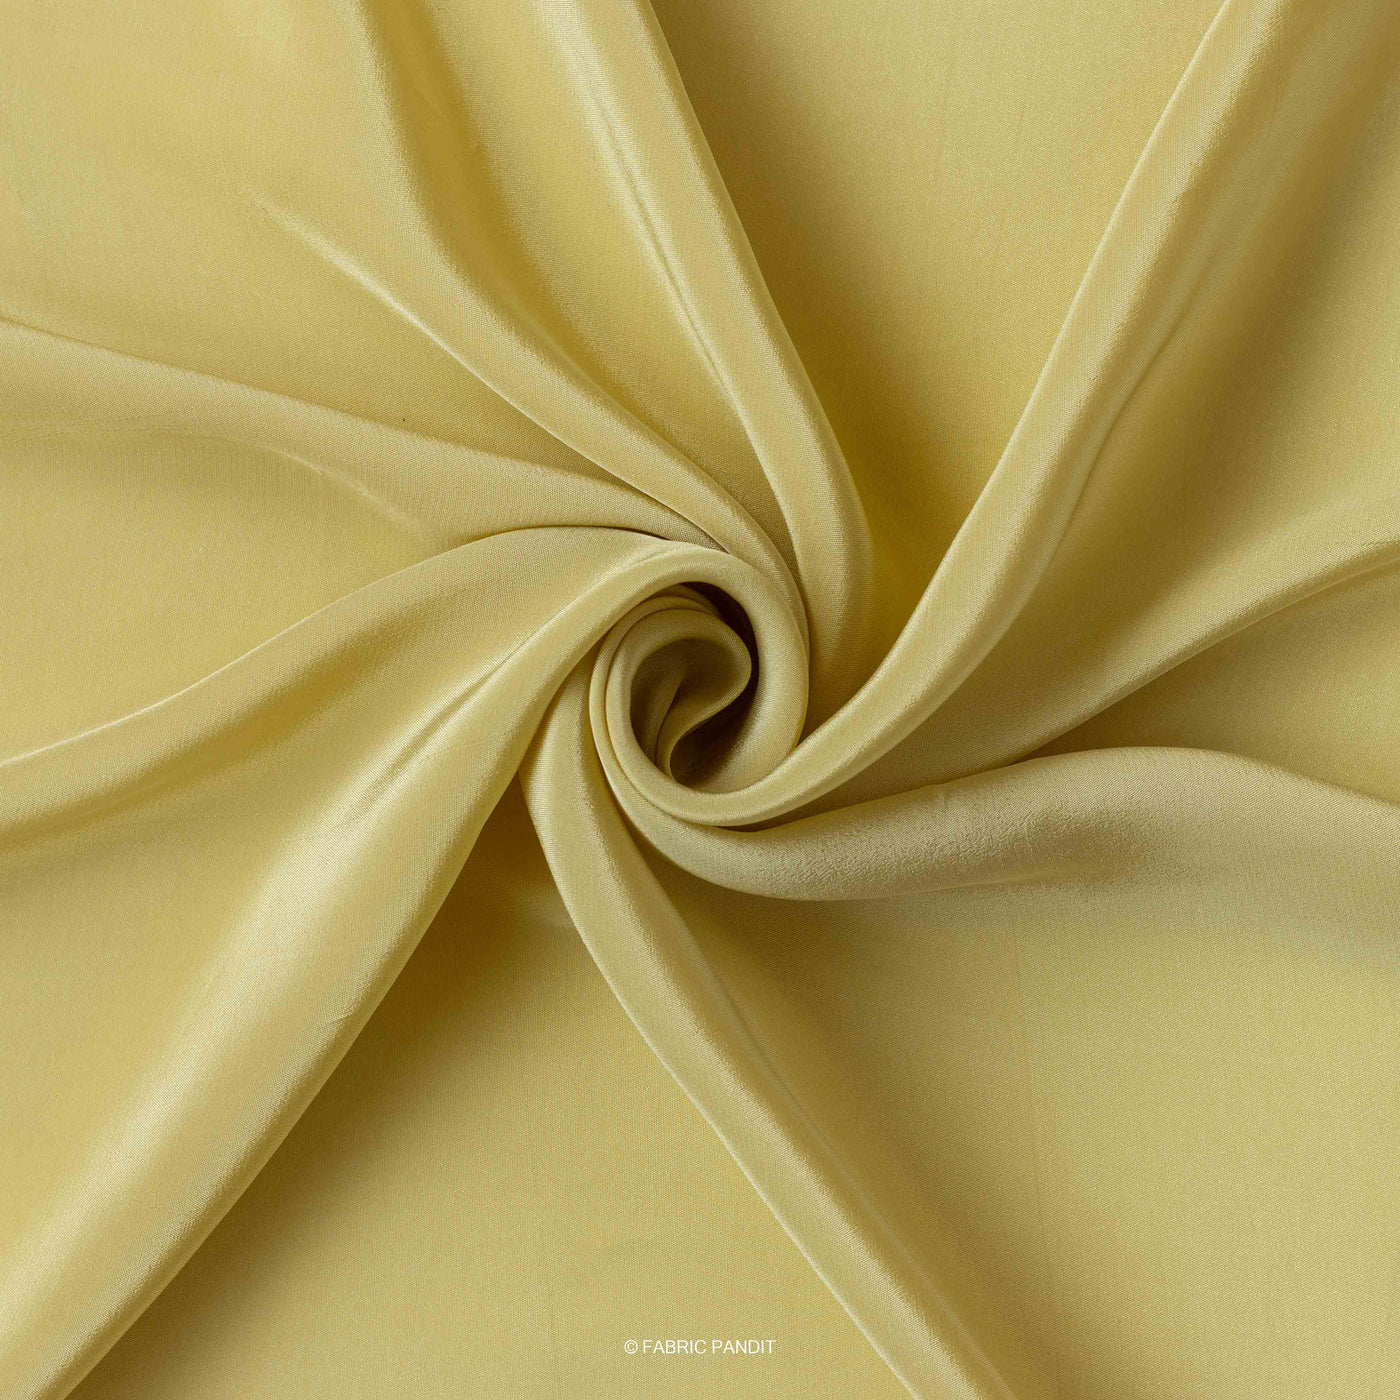 Fabric Pandit Fabric Bright Olive Green Plain Pure Viscose Natural Crepe Fabric (Width 44 Inches)